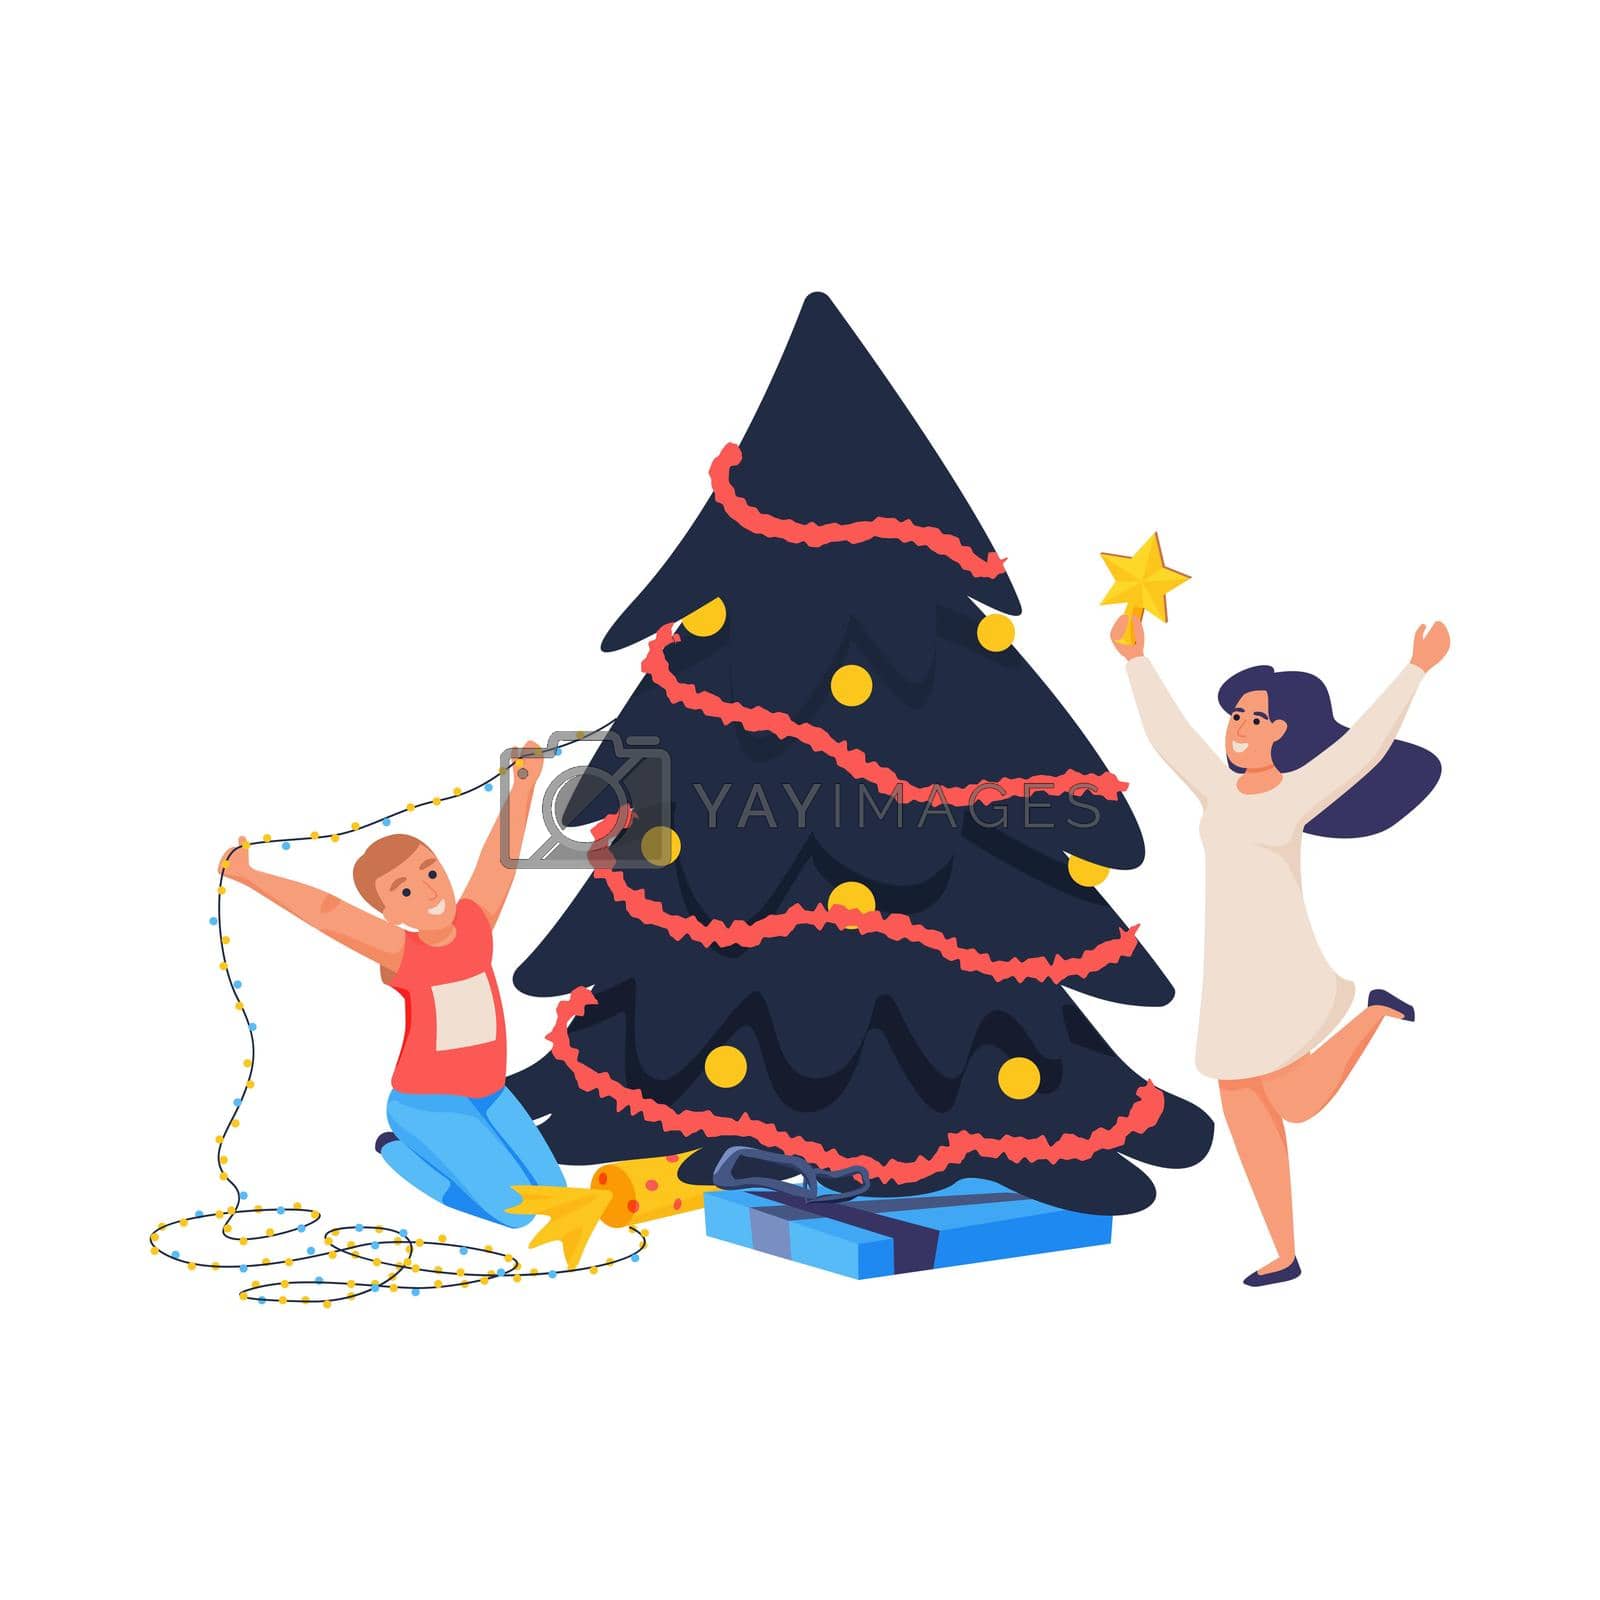 Christmas celebration flat icon with happy people near decorated tree vector illustration